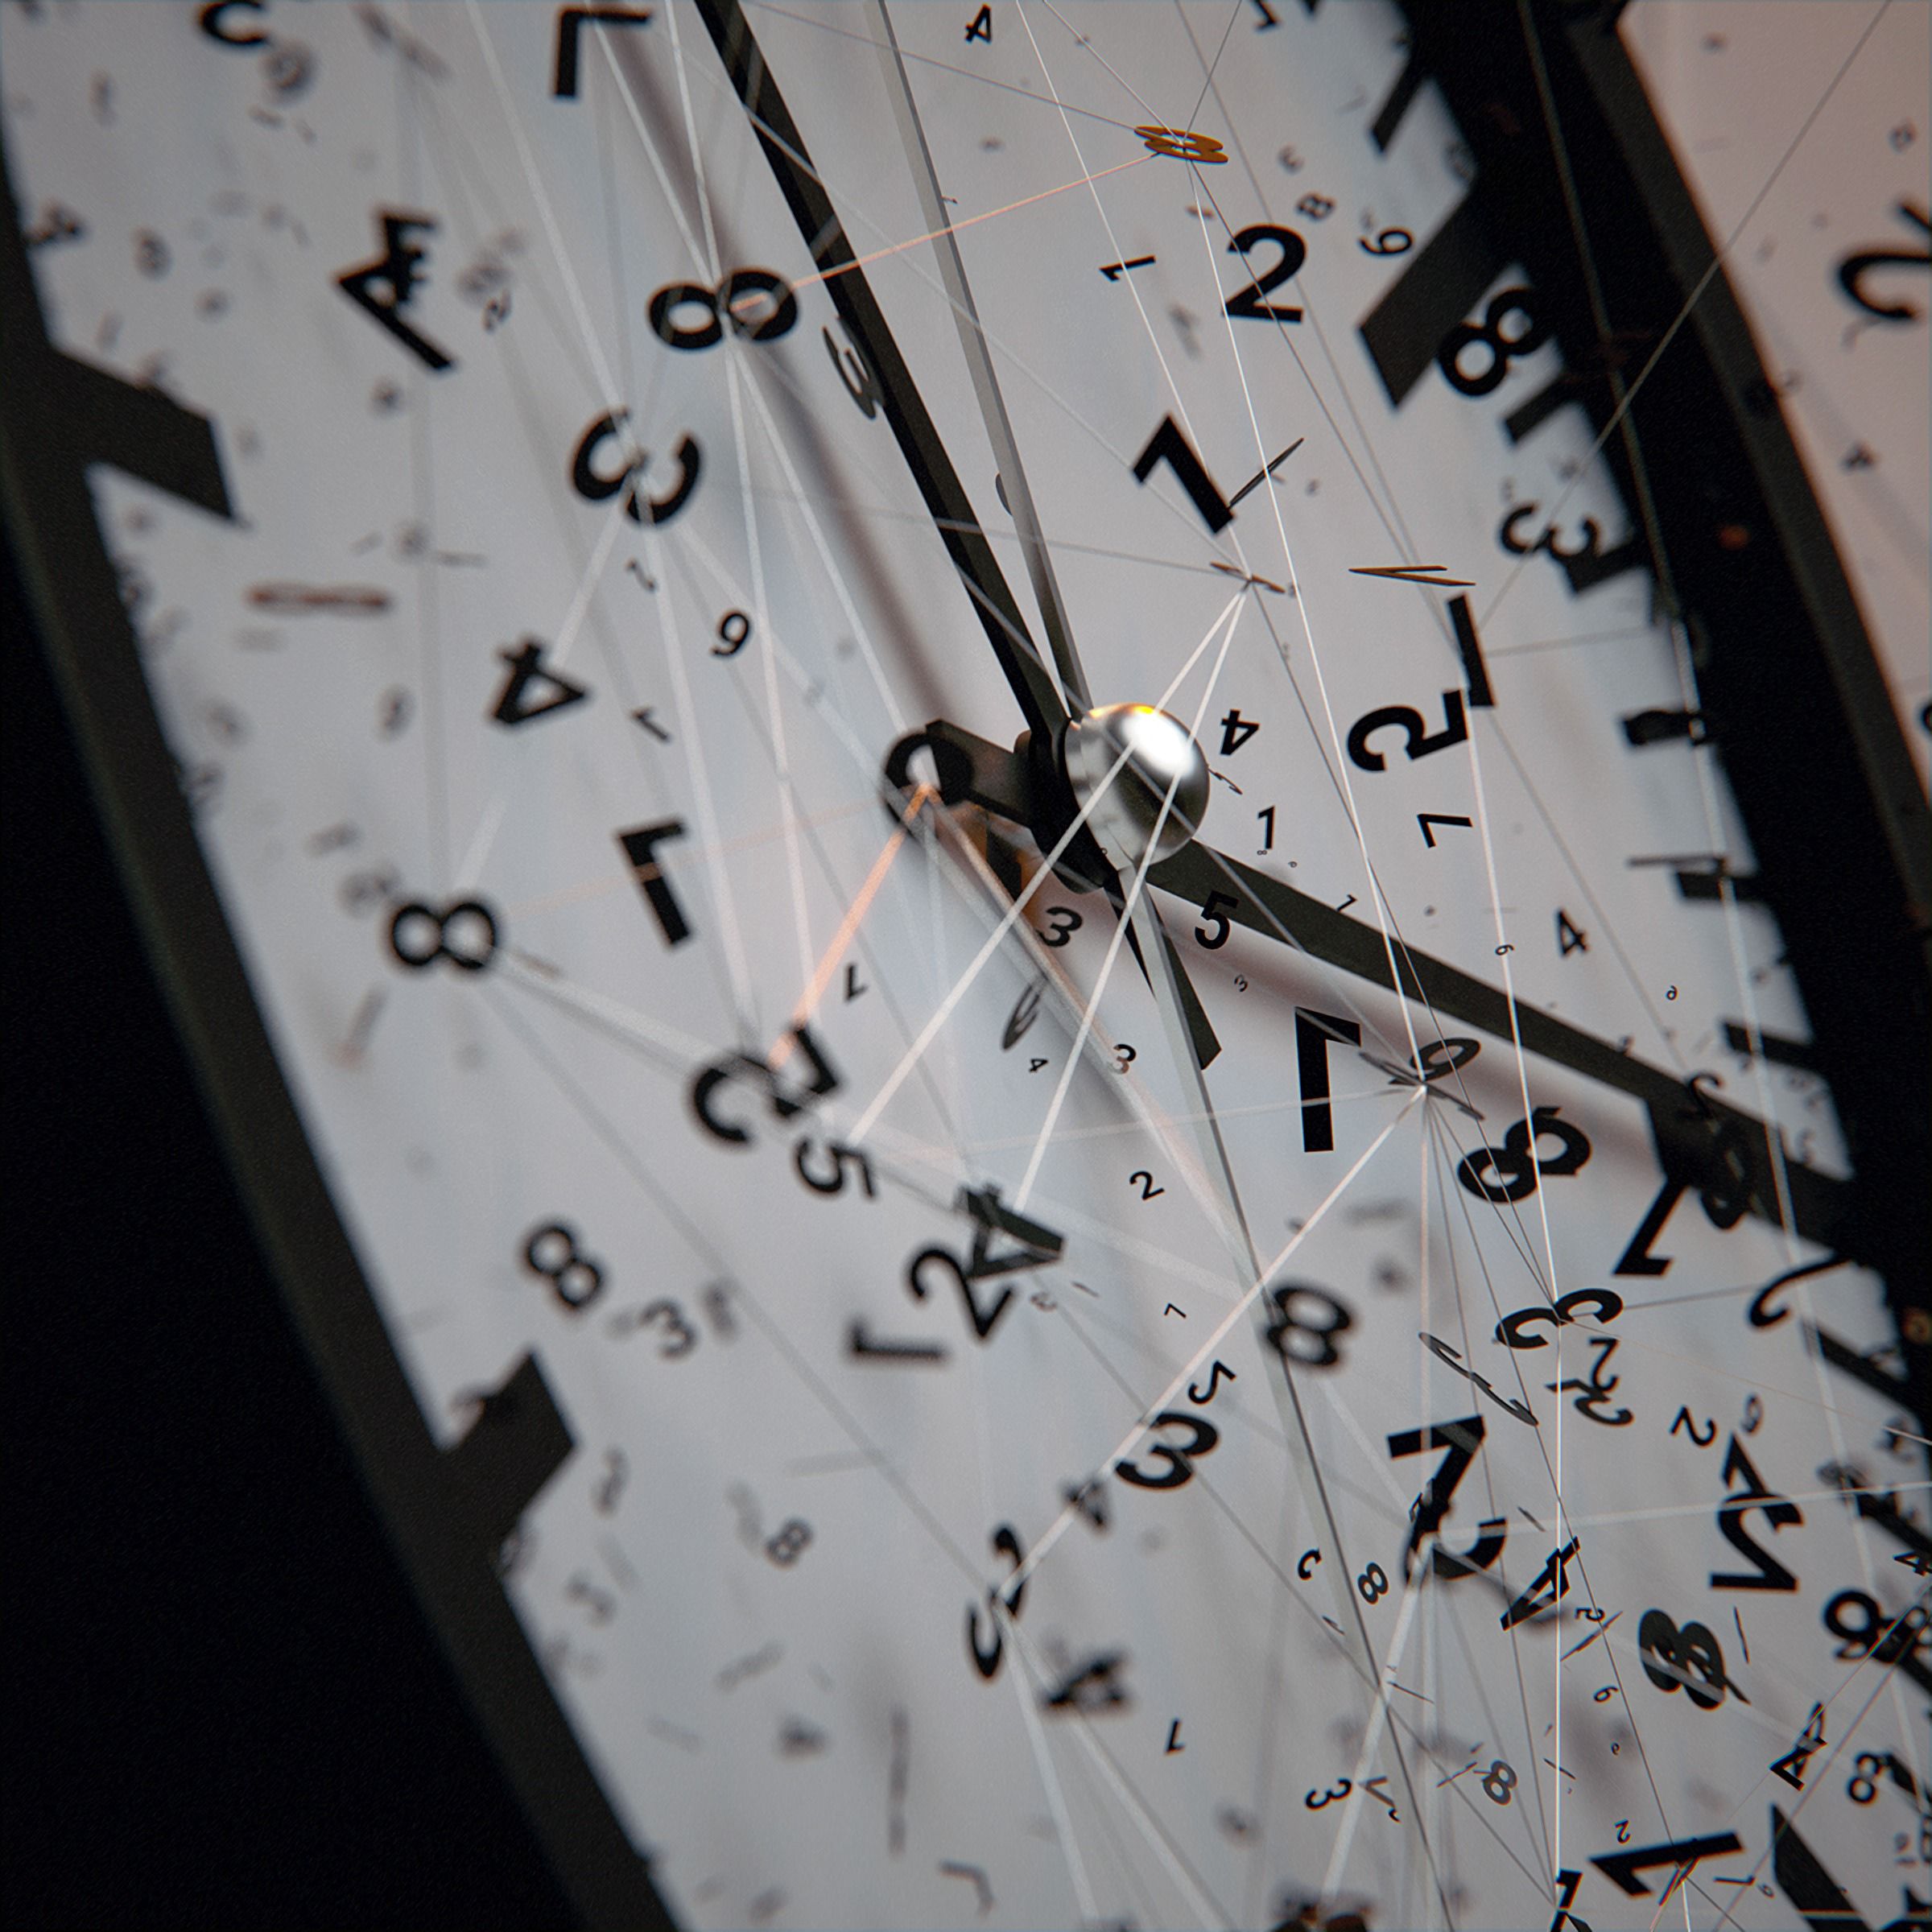 miscellanea, clock, numbers, dial, intricate, miscellaneous, clock face, lines, confused, arrows Phone Background